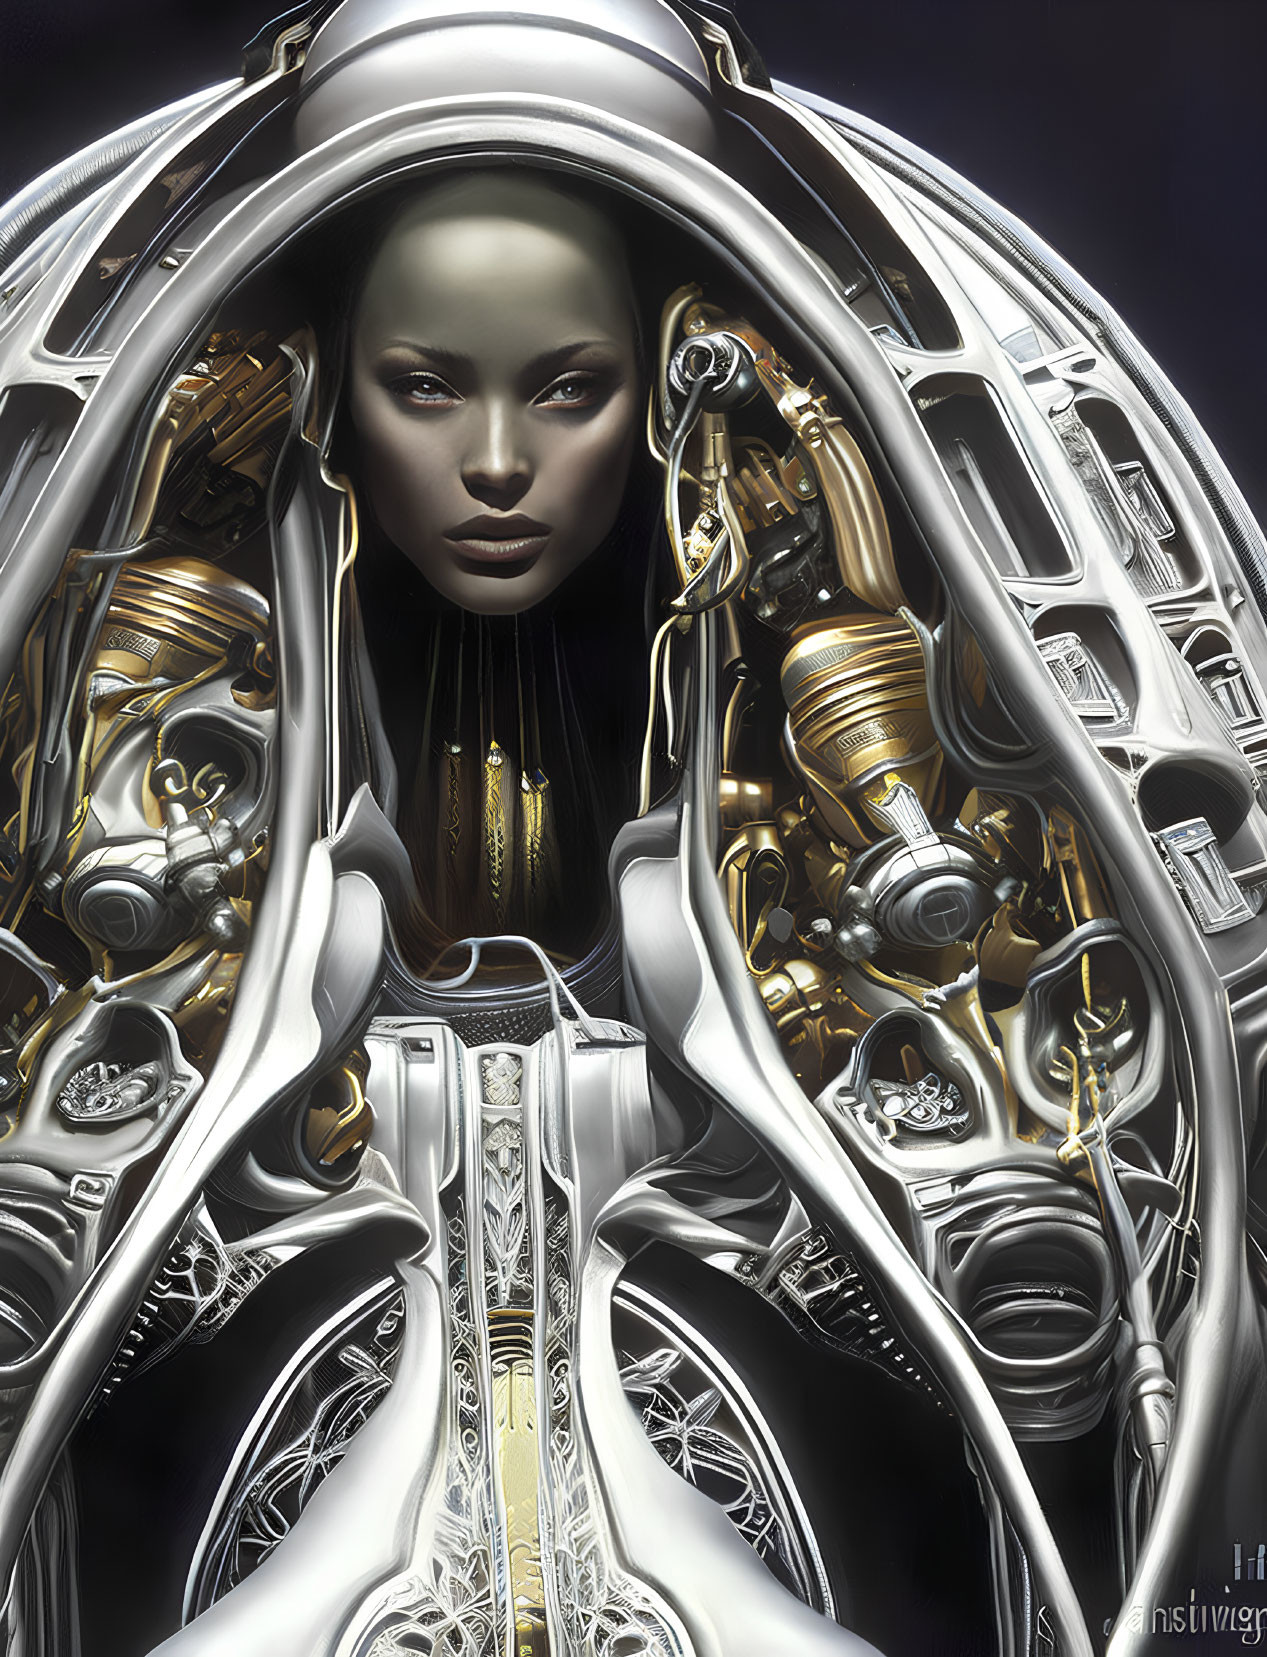 Futuristic portrait of woman with metallic skin and golden robotic elements